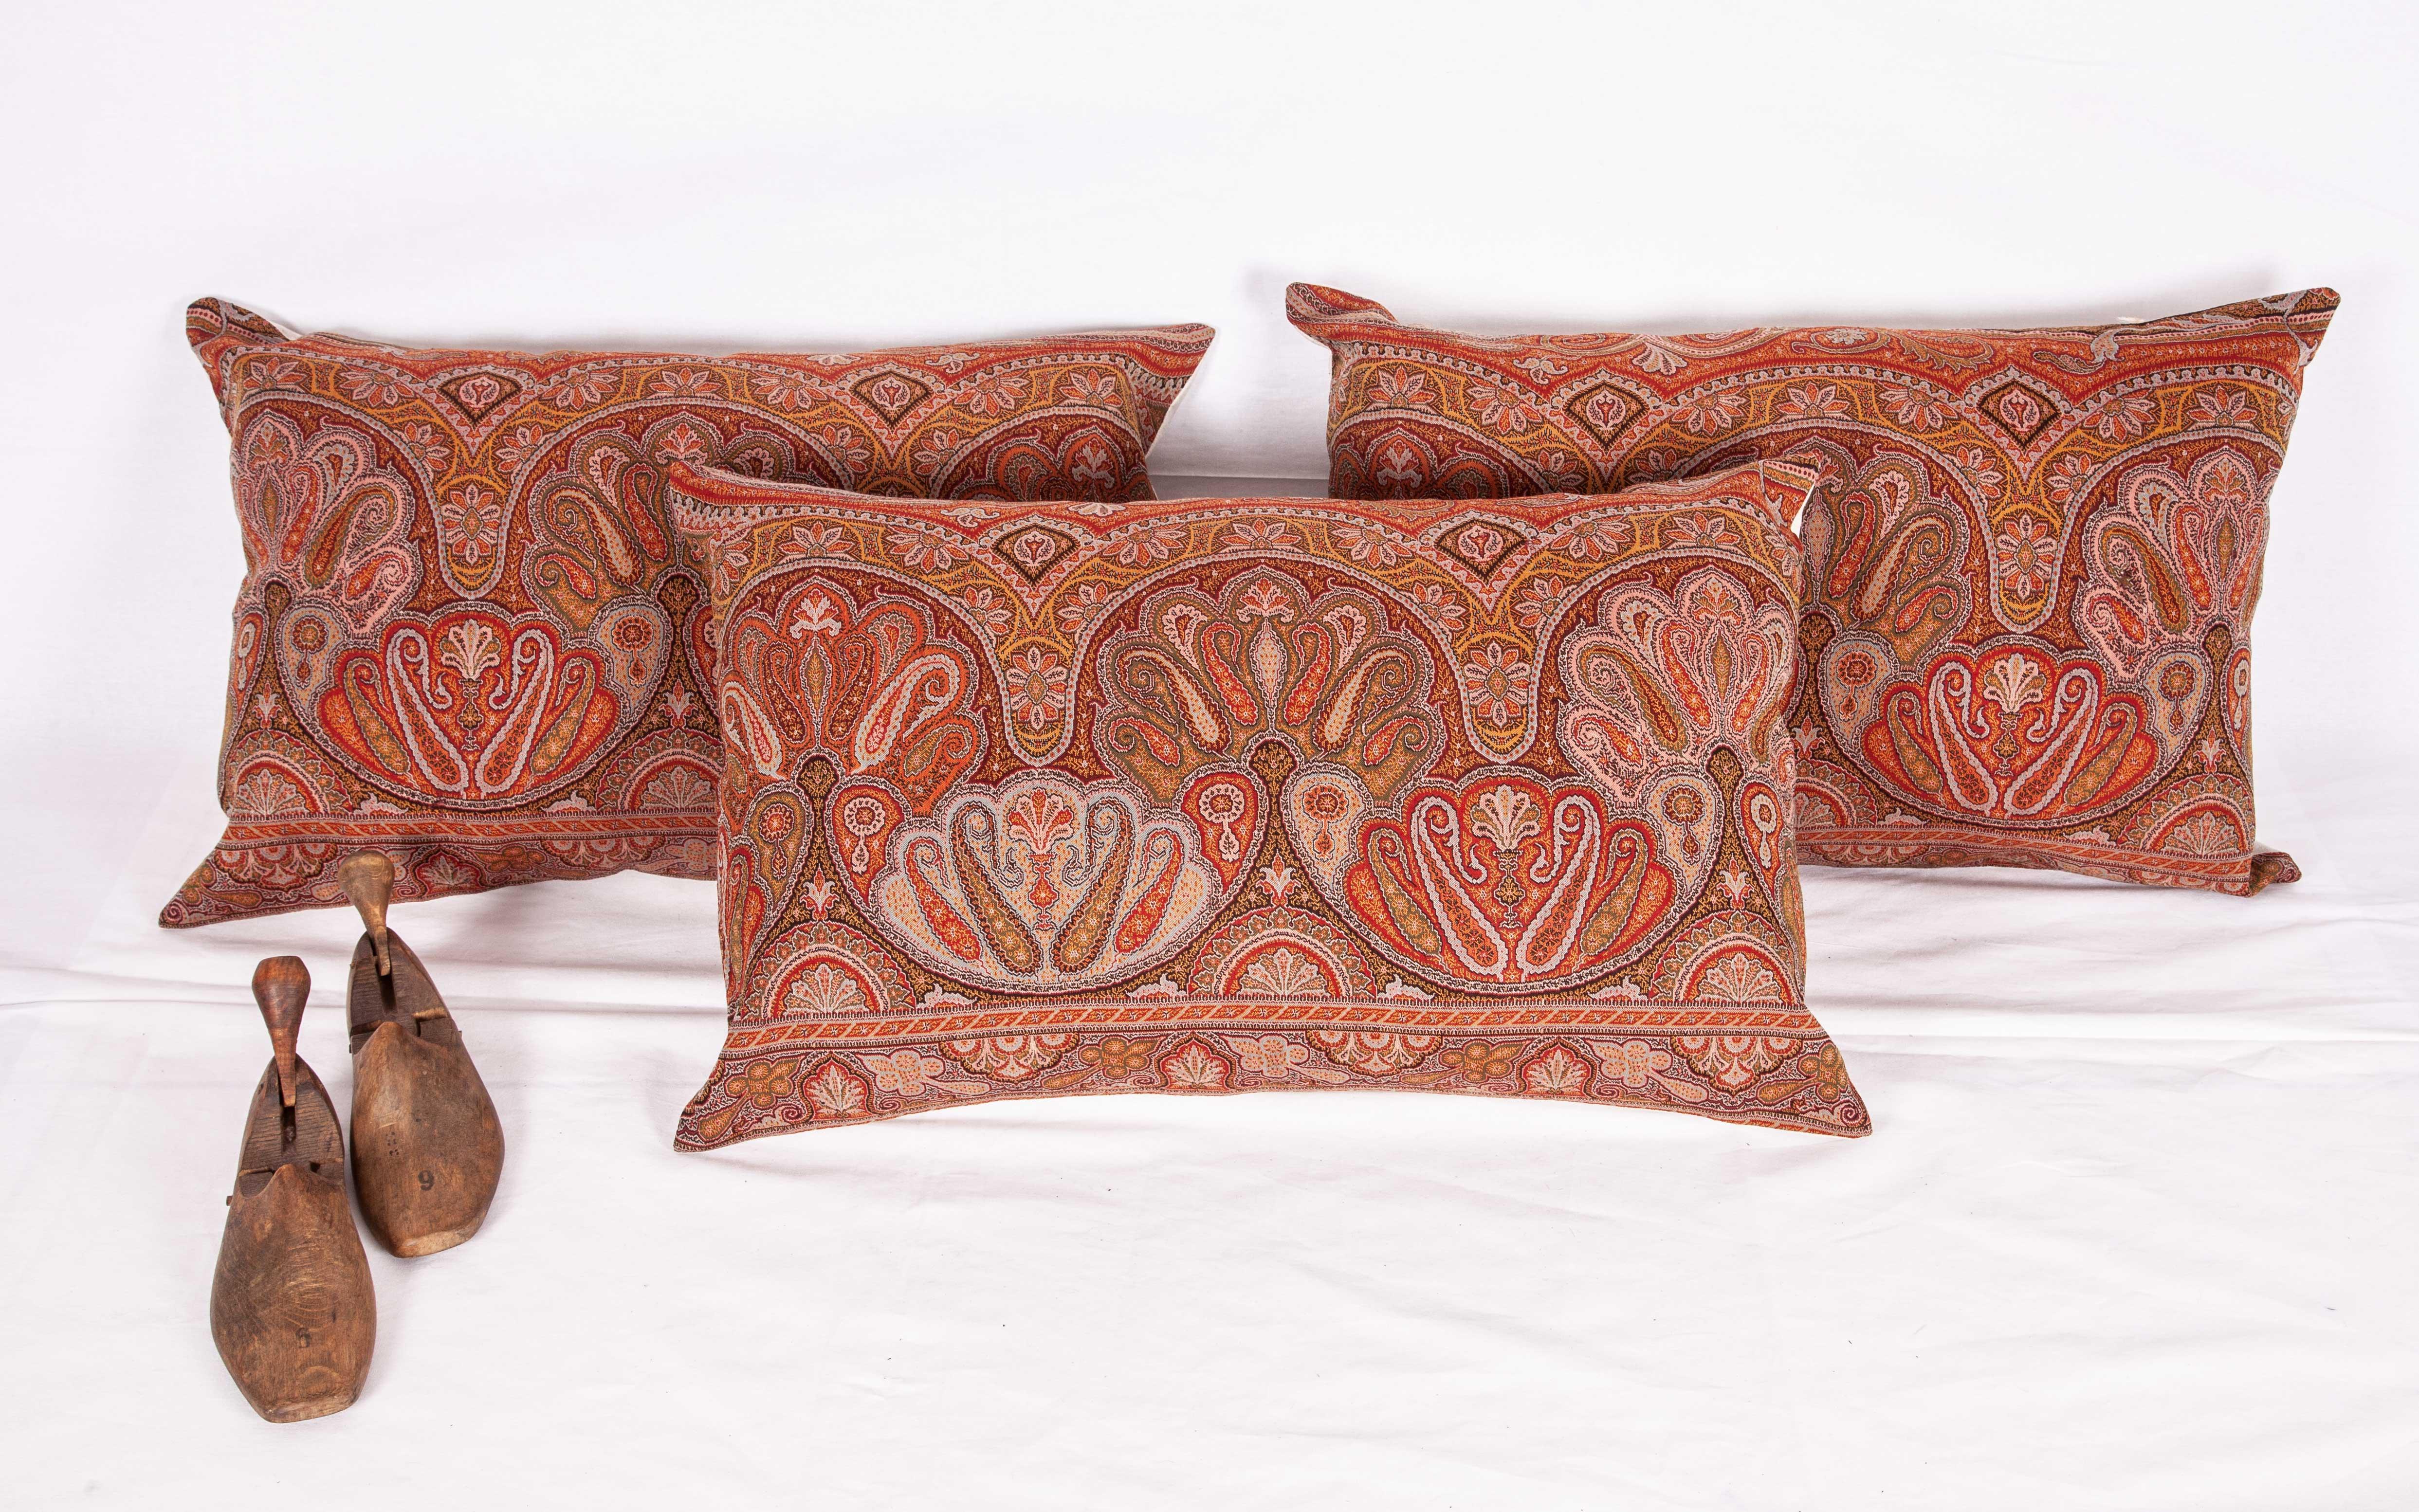 The pillow is made from an early 19th century paisley shawl. It does not come with an insert but it comes with a bag made to the size and out of cotton to accommodate the filling. The backing is made of linen. Please note: Filling is not provided.